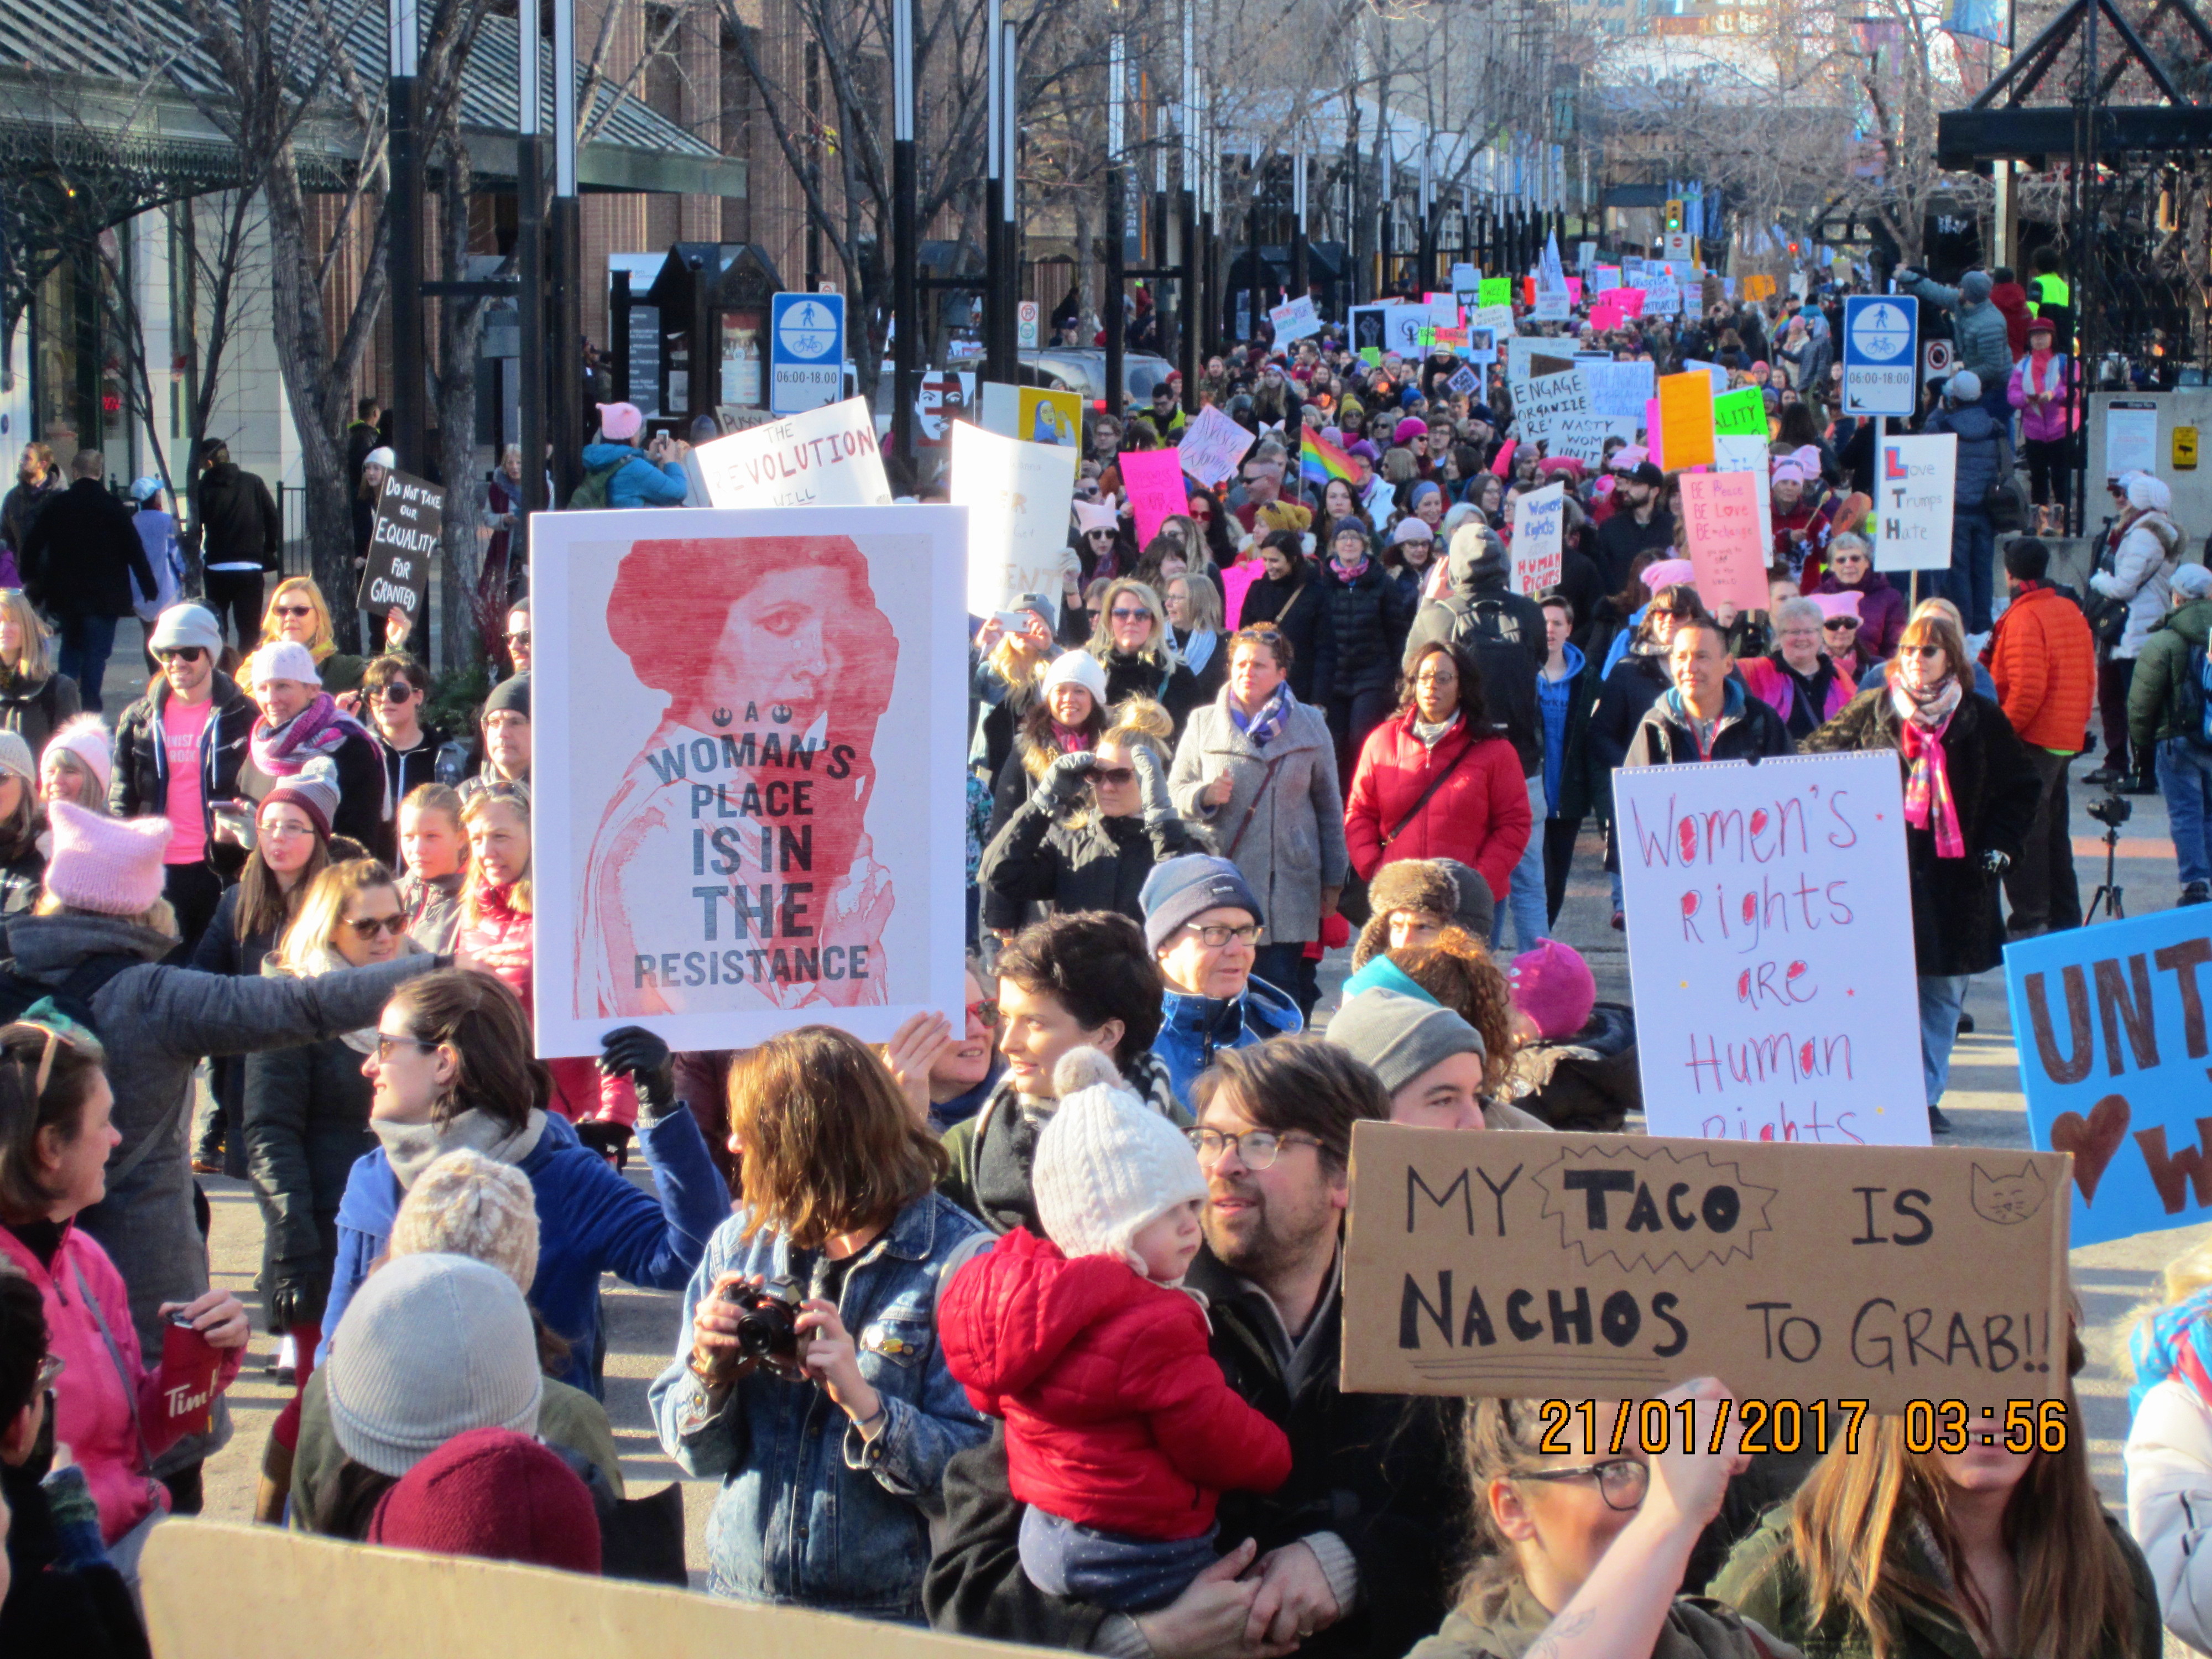 Women's March signs, A woman's place is in the resistance